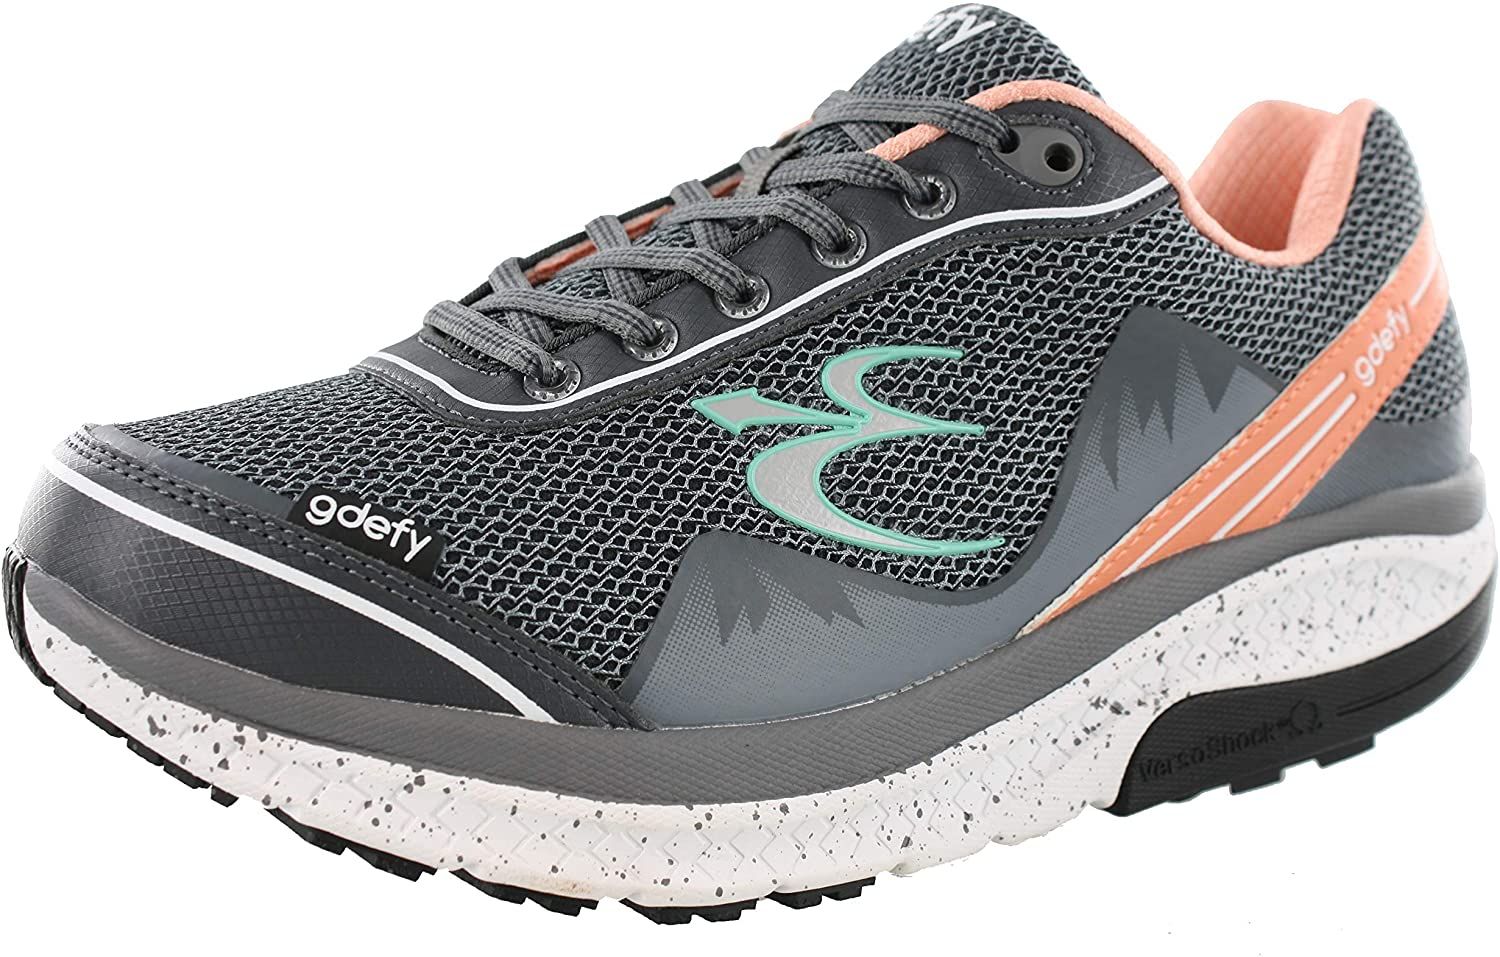 84 Best Buy shoes for plantar fasciitis Combine with Best Outfit